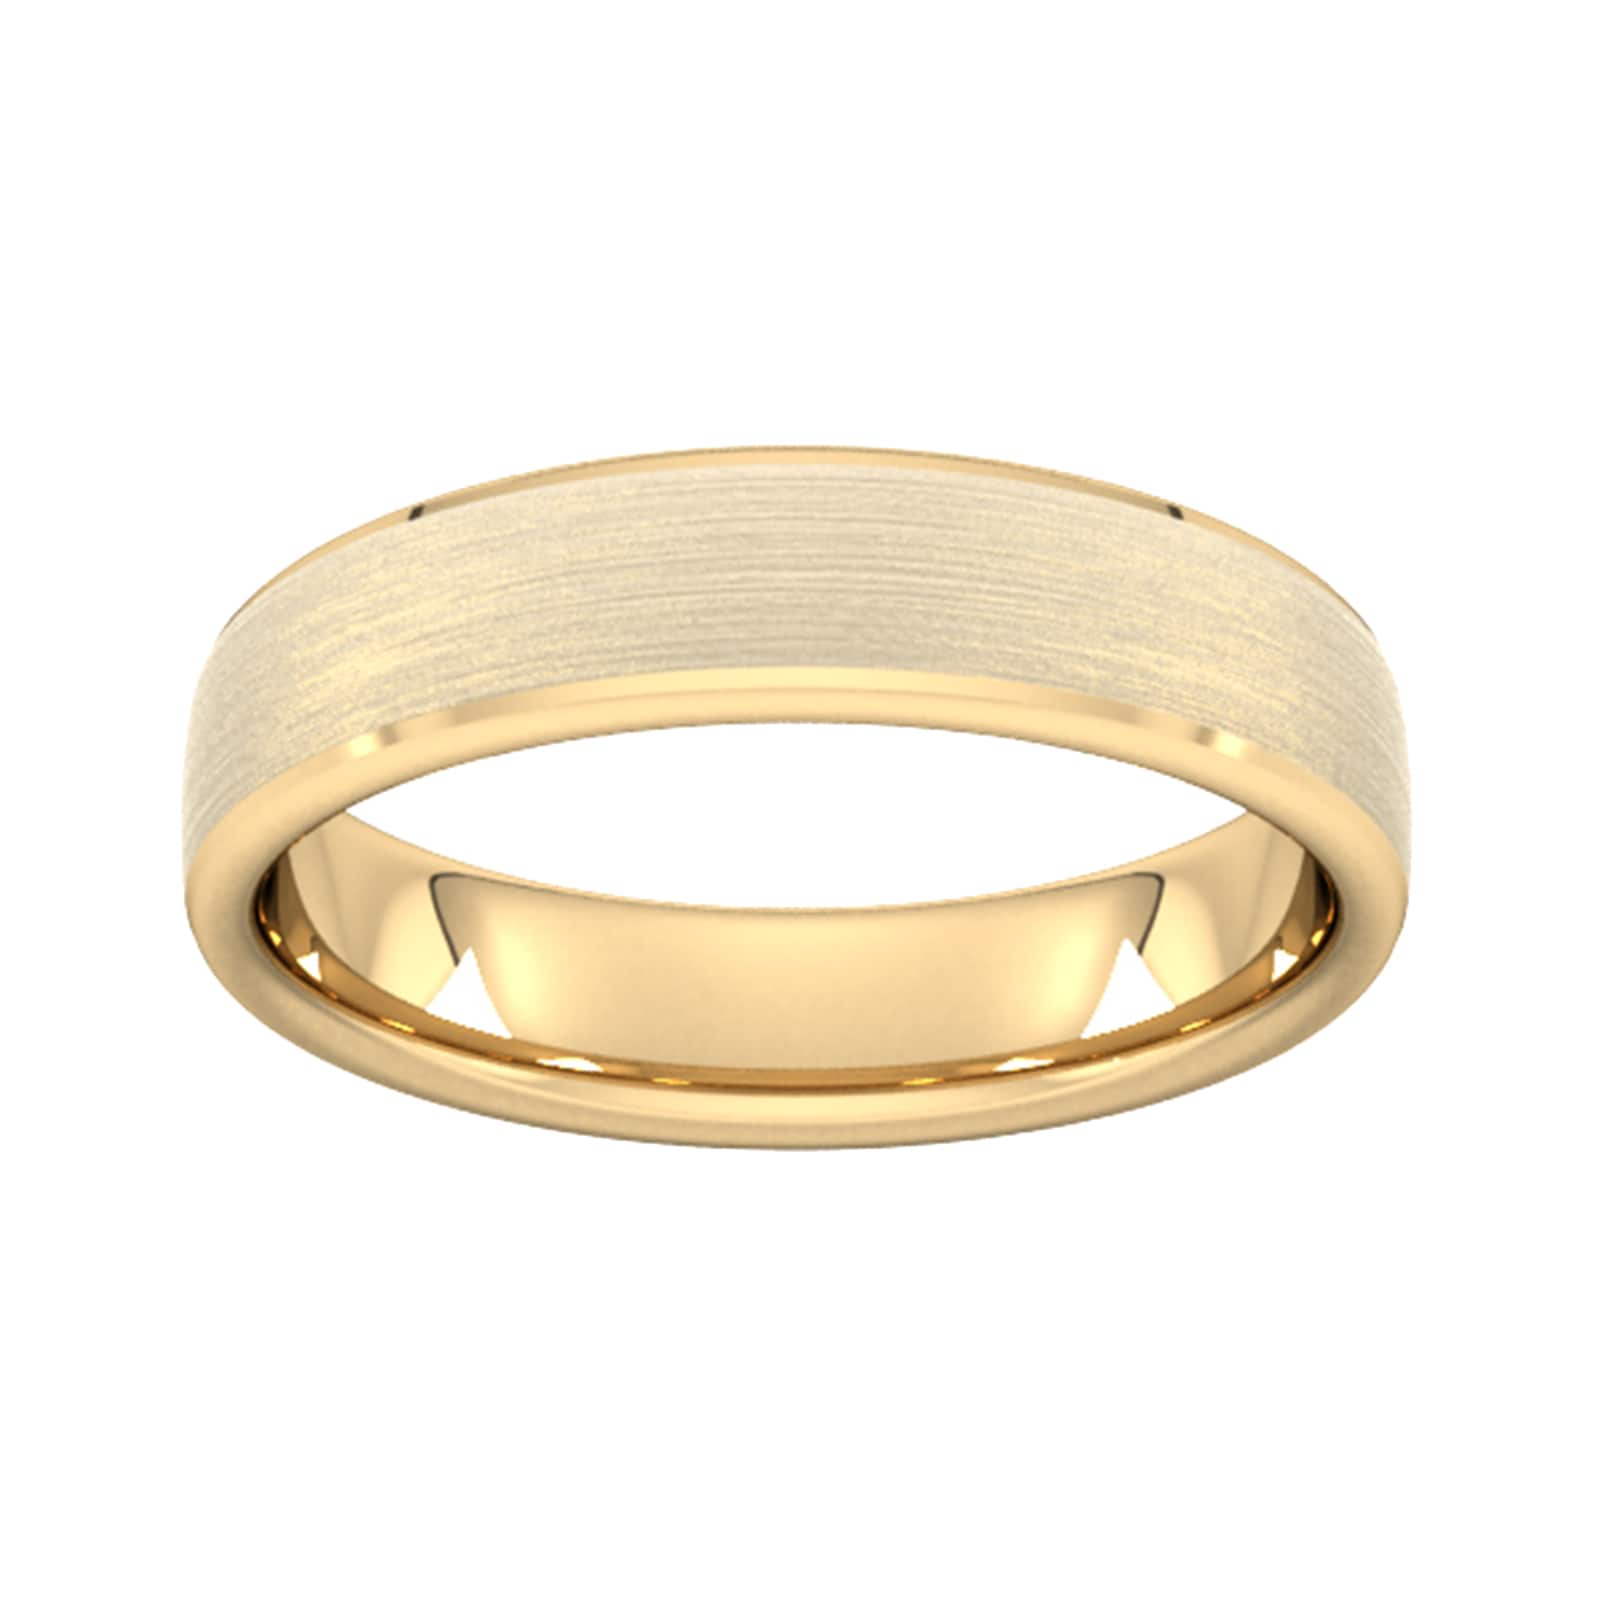 5mm Slight Court Standard Polished Chamfered Edges With Matt Centre Wedding Ring In 18 Carat Yellow Gold - Ring Size X